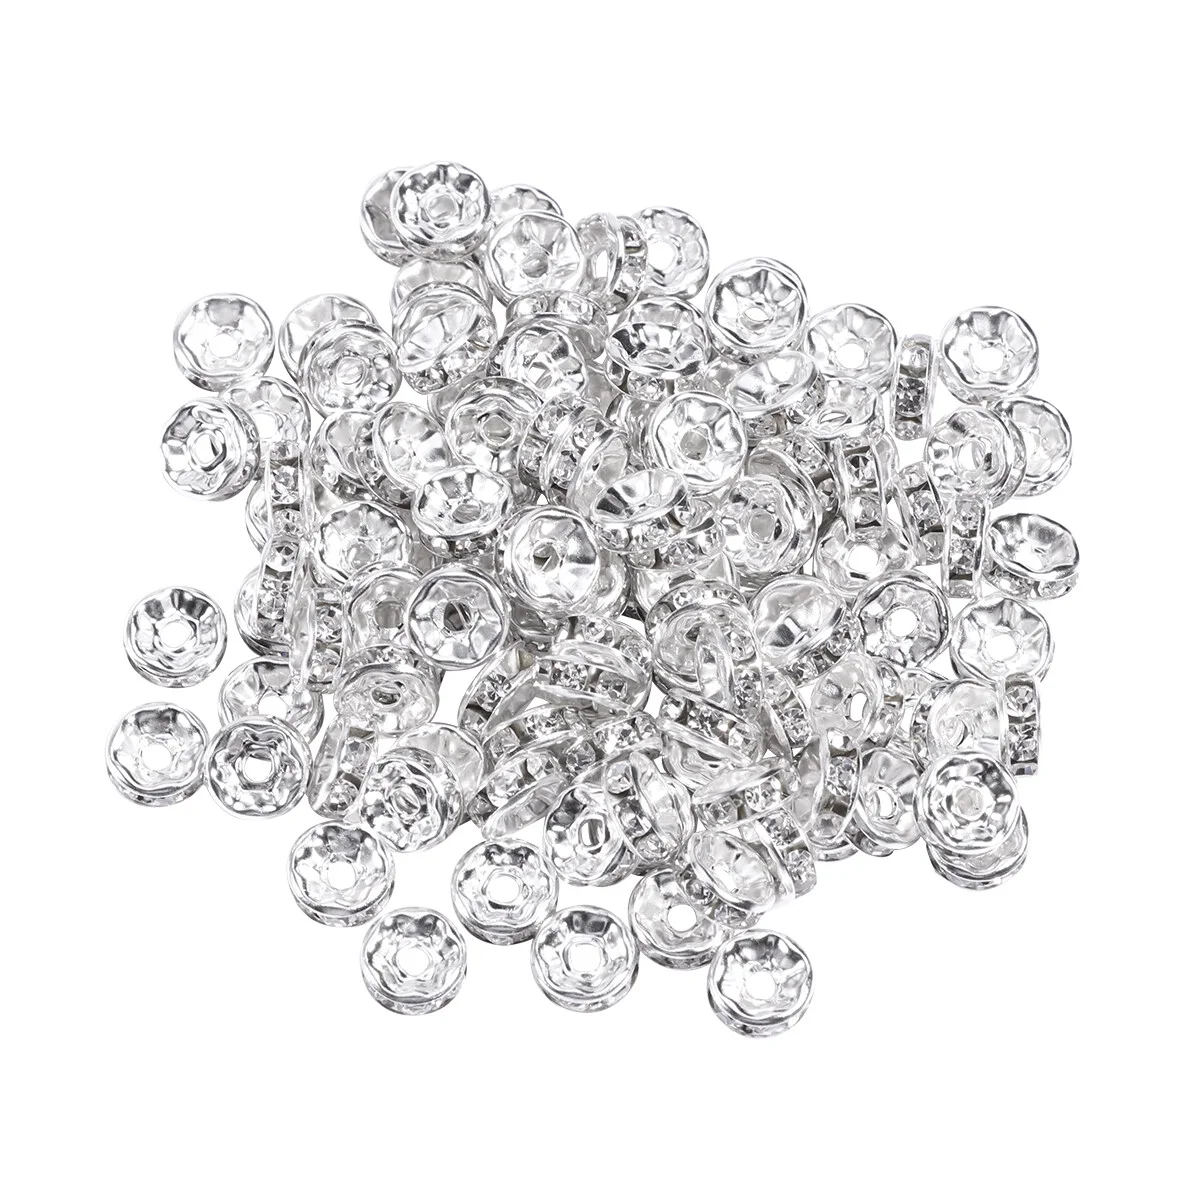 

100pcs Rhinestone Rondelle Spacer Bead Plated 8mm Beads Findings for Jewelery Making DIY Craft (Silver)